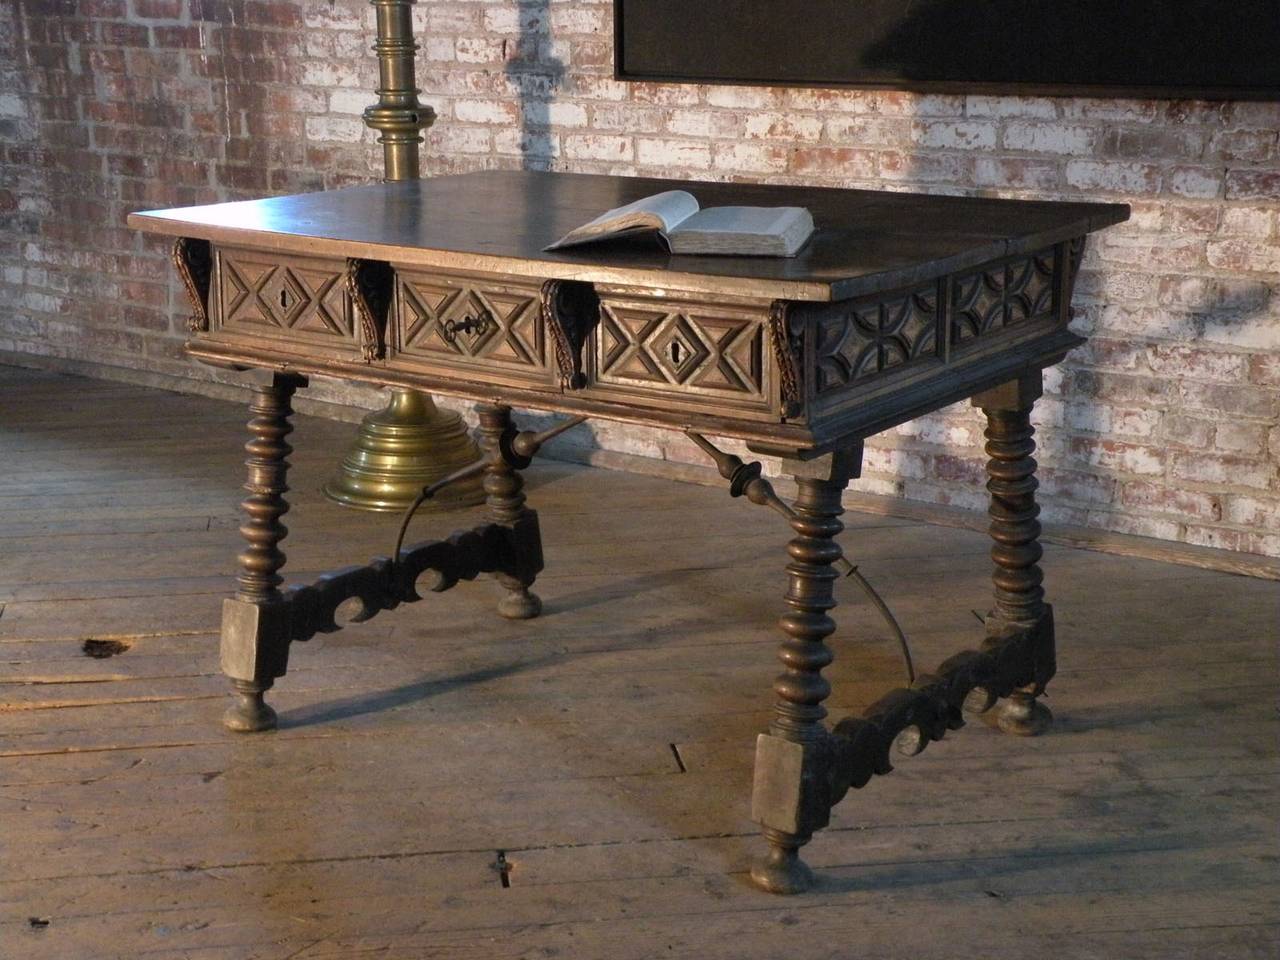 Superb model with a deeply paneled frieze, having geometric fruitwood inlay, containing three drawers. The strong disc-turned legs connected by shaped side stretchers and wrought iron middle stretchers. Excellent color and patina.
